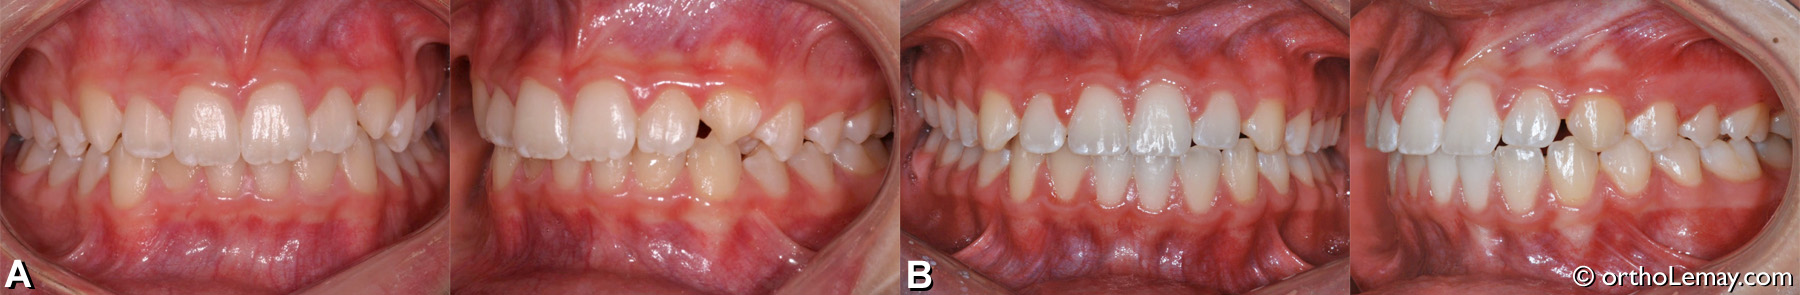 malocclusion dentaire classe 1, chevauchement dentaire, corrections orthodontiques adolsecent. Orthodontie Sherbrooke 